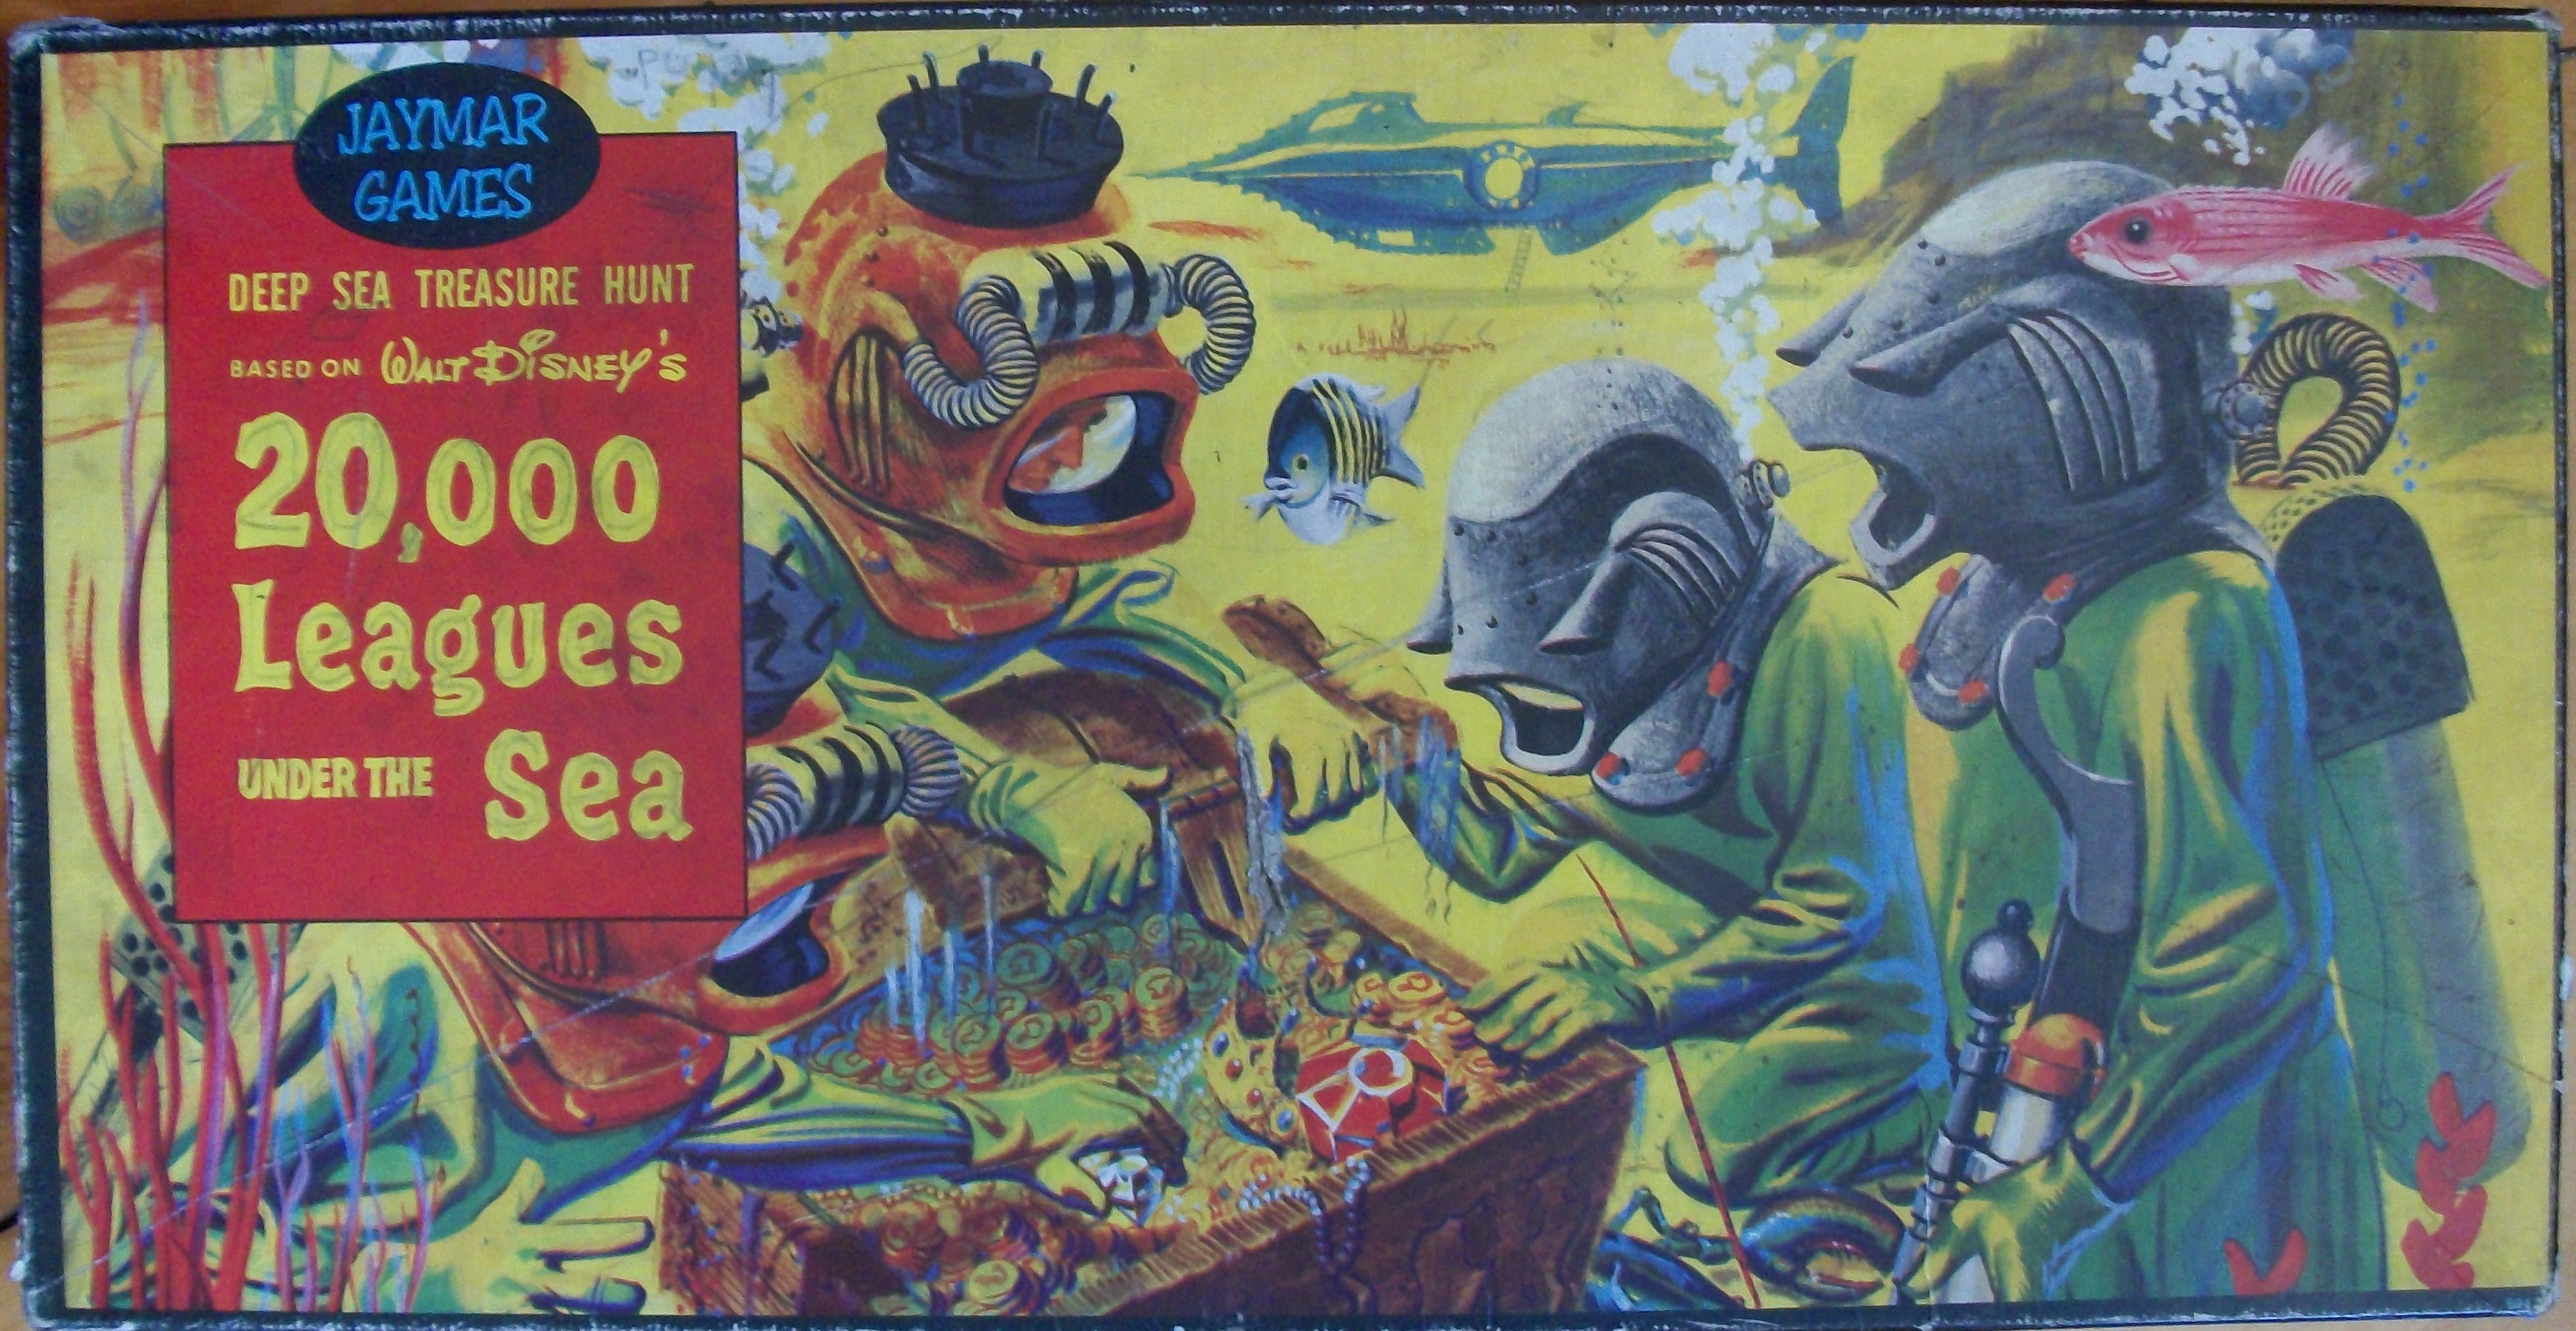 1954 Vintage Game: 20,000 Leagues Under the Sea by Jaymar Games